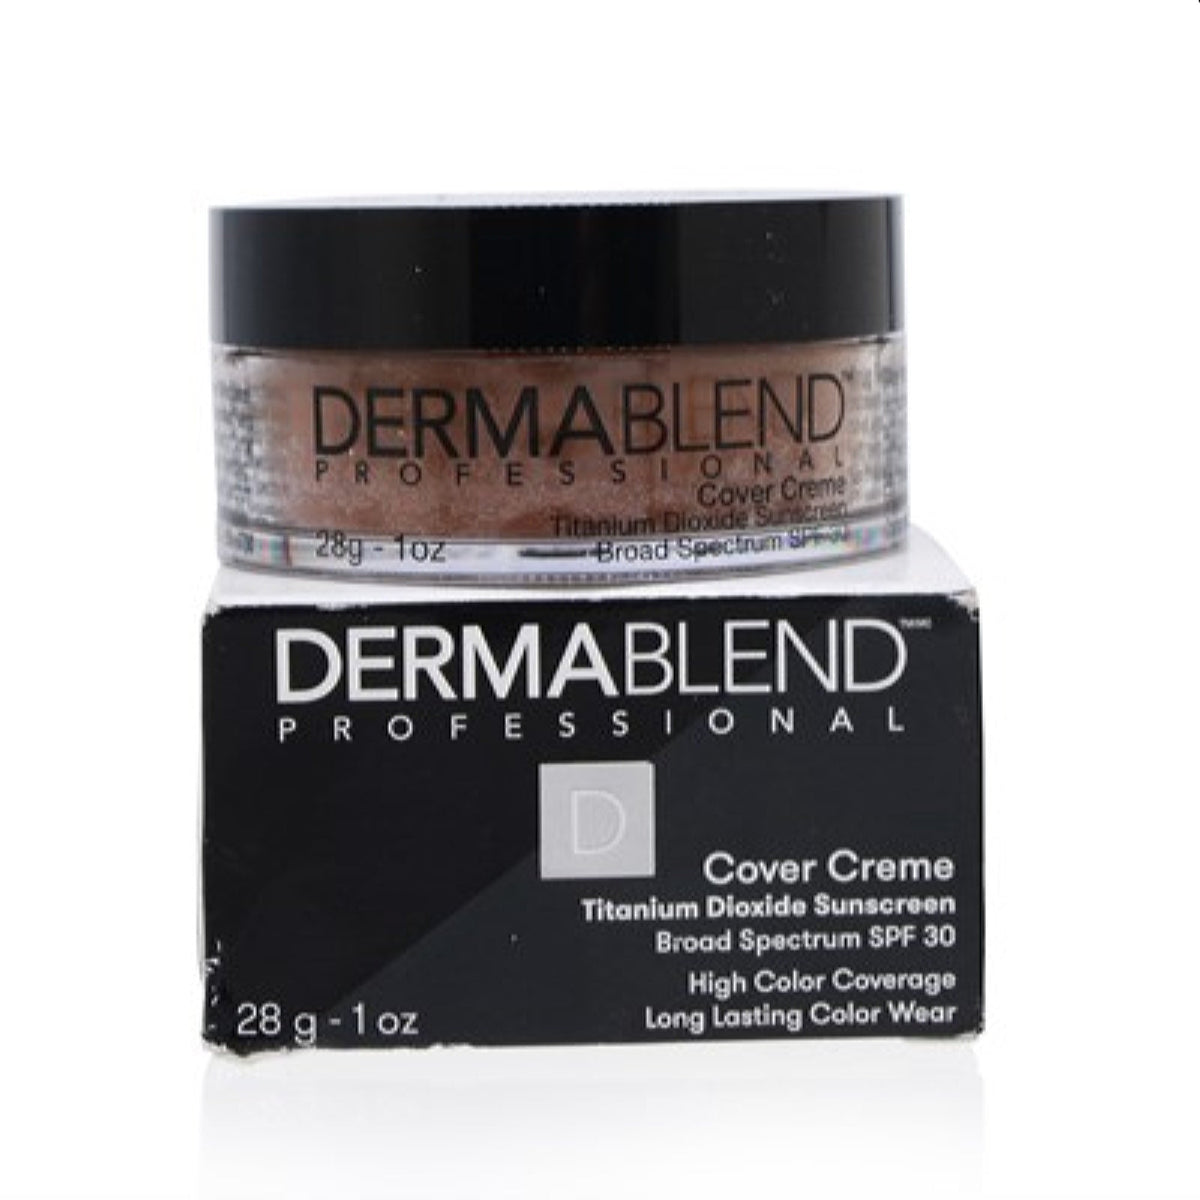 Dermablend Cover Creme Foundation Spf 30 (80W Chocolate Brown) 1.0 Oz (28 Ml)   